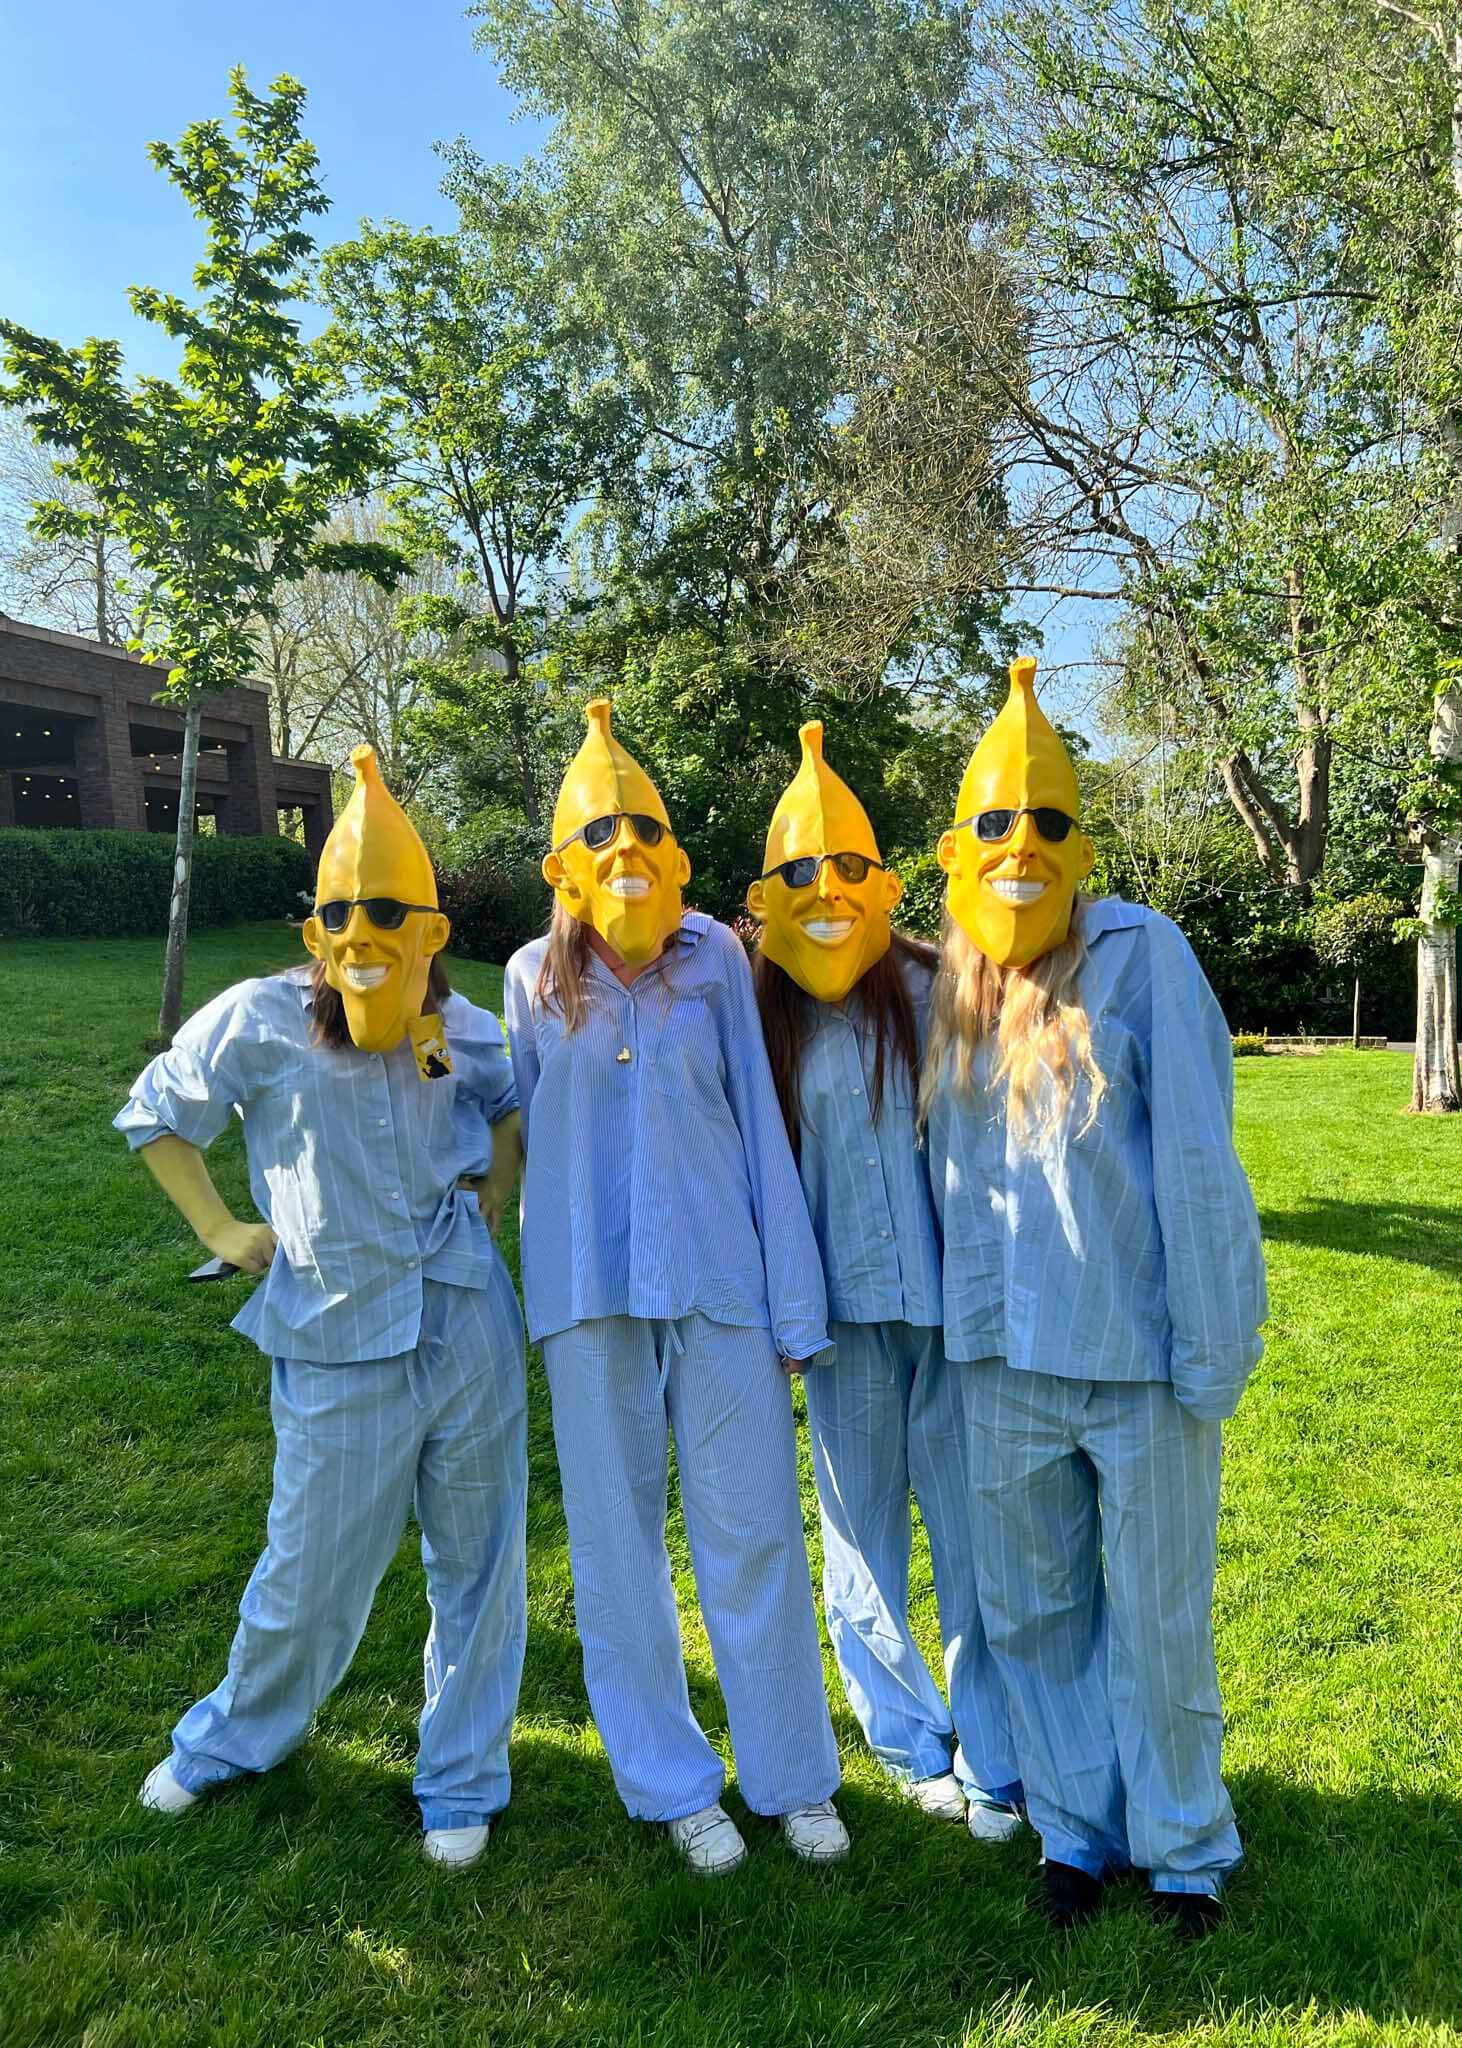 Upper sixth form pupils in fancy dress for their last day at  Ibstock Place School, a private school near Richmond, Barnes, Putney, Kingston, and Wandsworth on an overseas trip. 